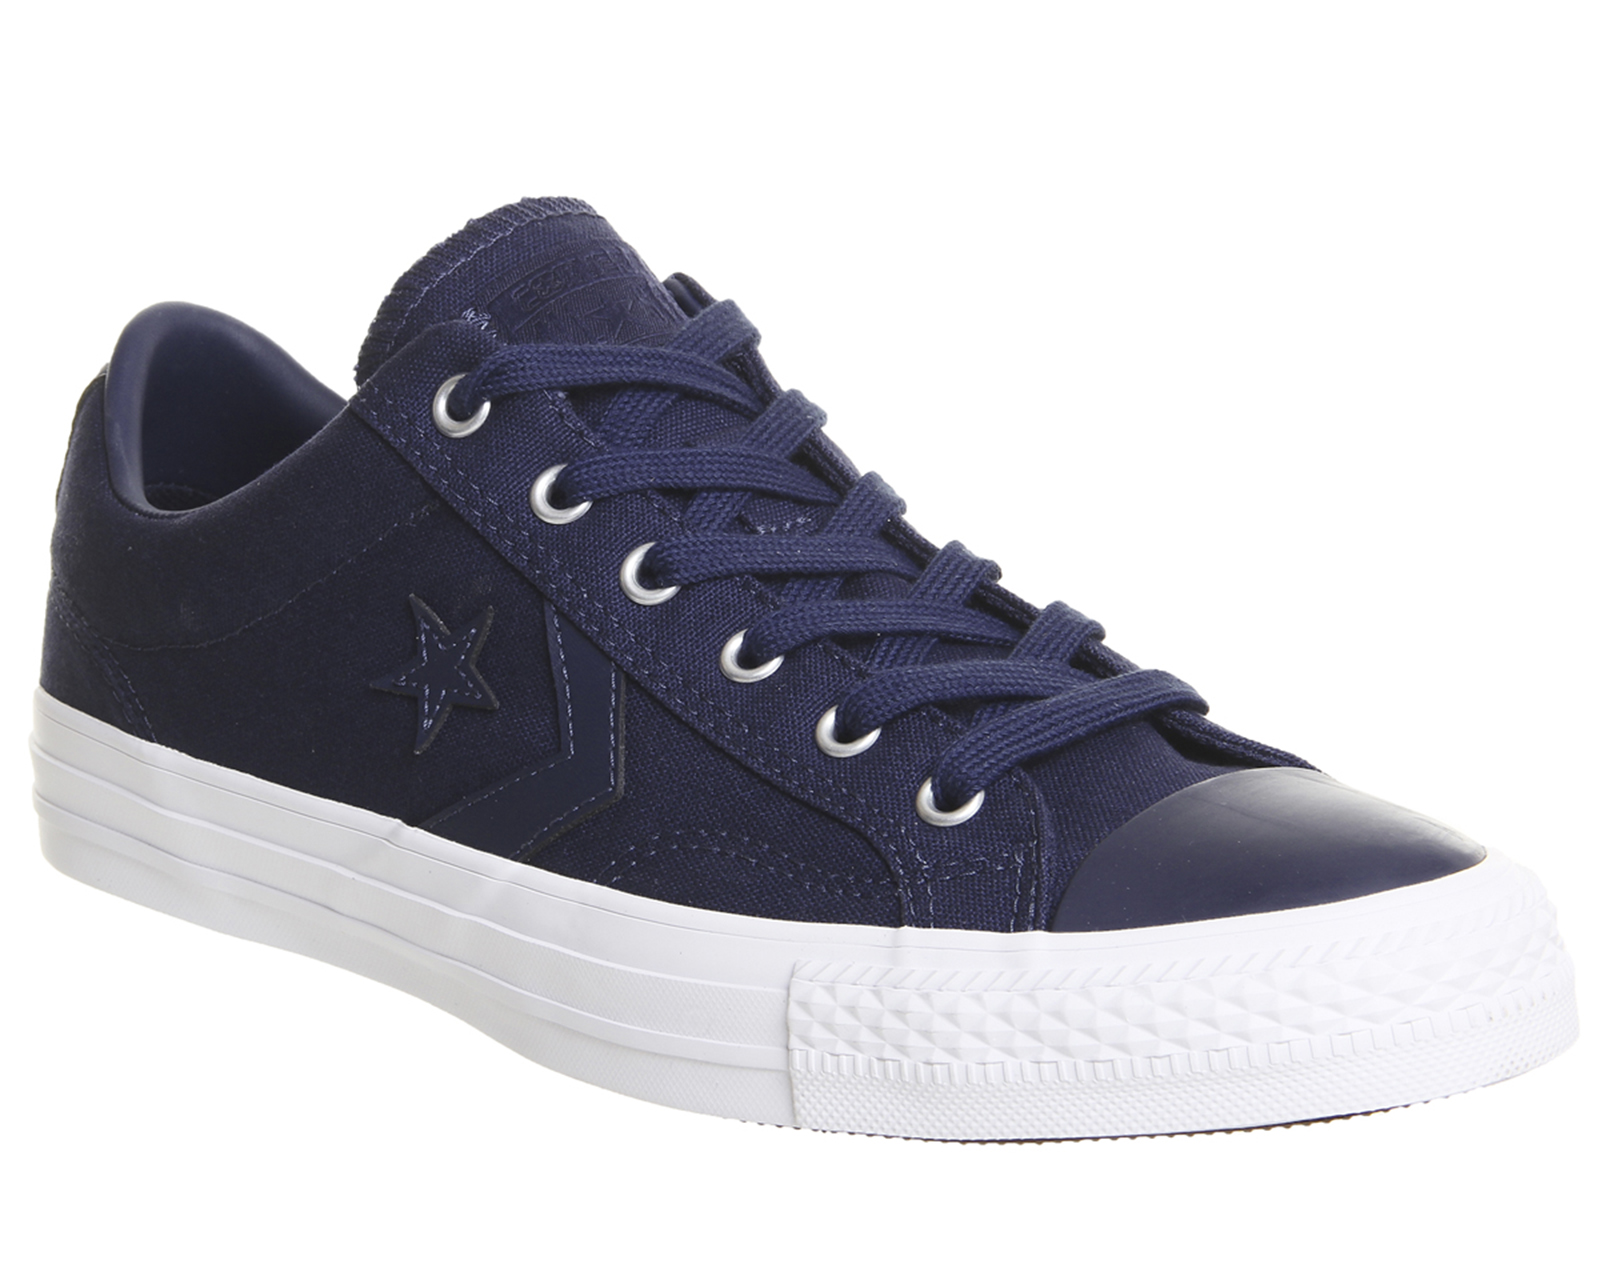 Converse Star Player Ox Midnight Navy White - His trainers